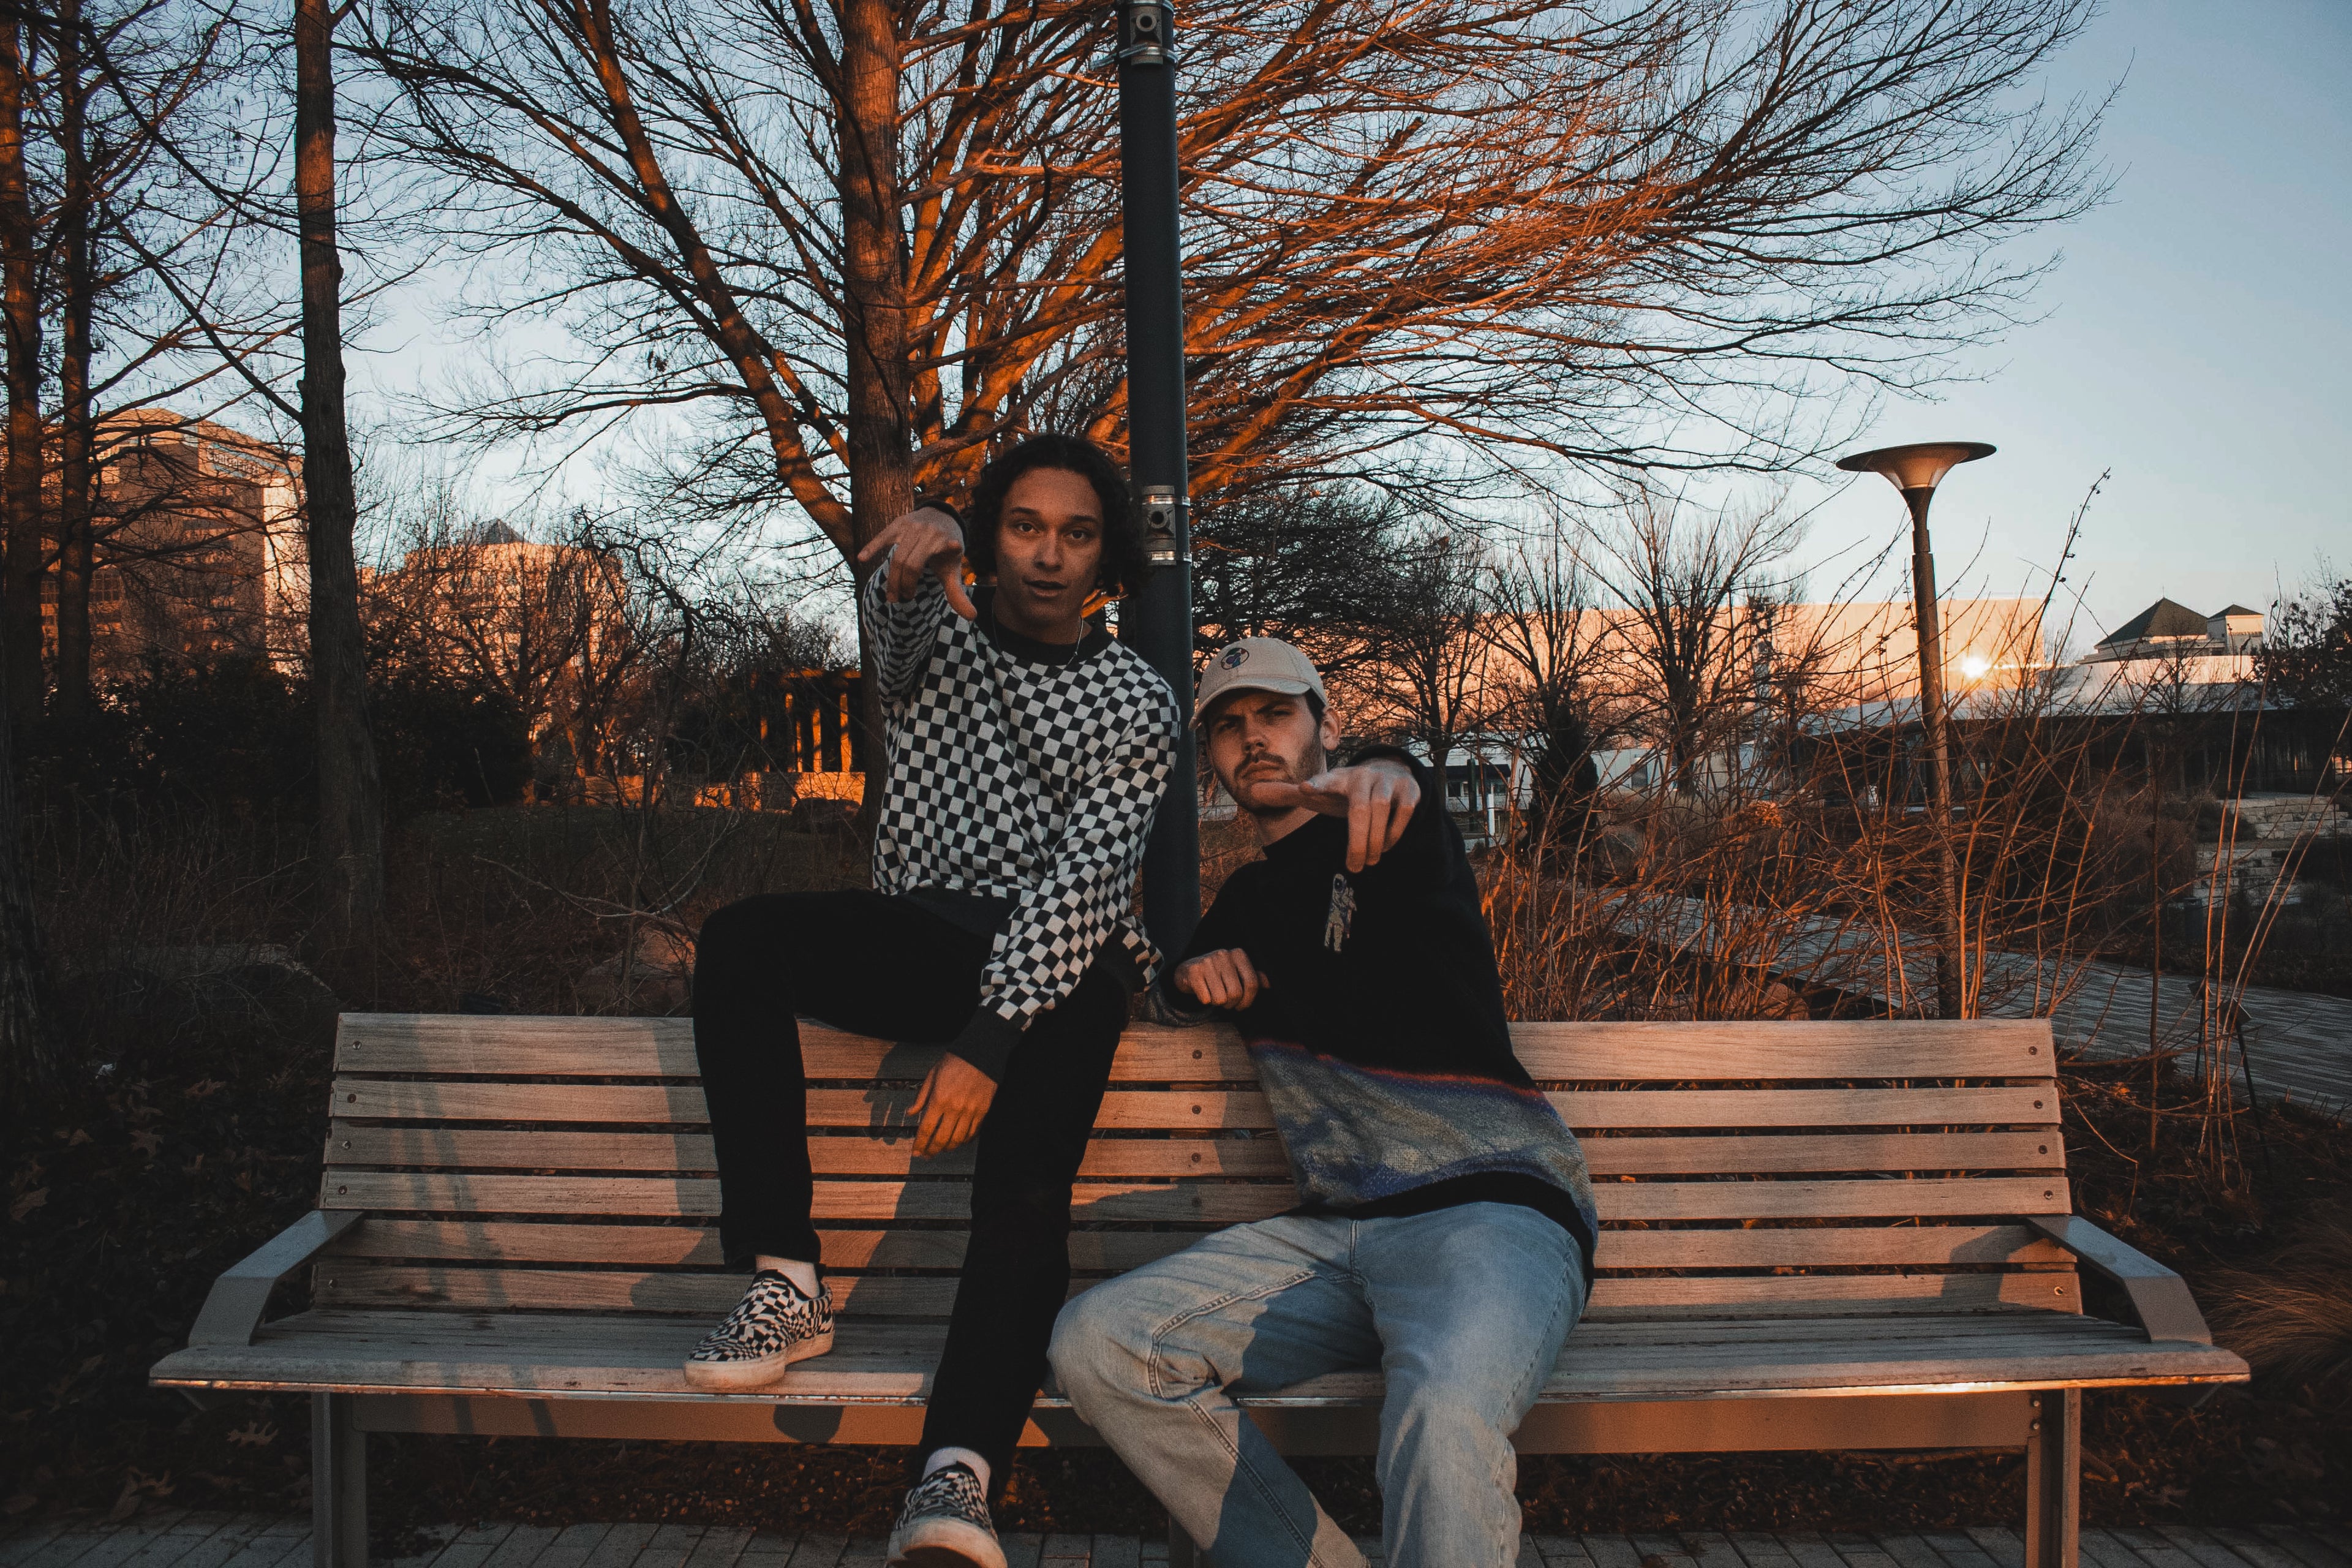 TruColours Apparel Jacquard knit sweaters (Checkered and Orbiter Sweater) being modeled by Aiden (left) and Blaine (right) on a random park bench [like Mordecai and Rigby].